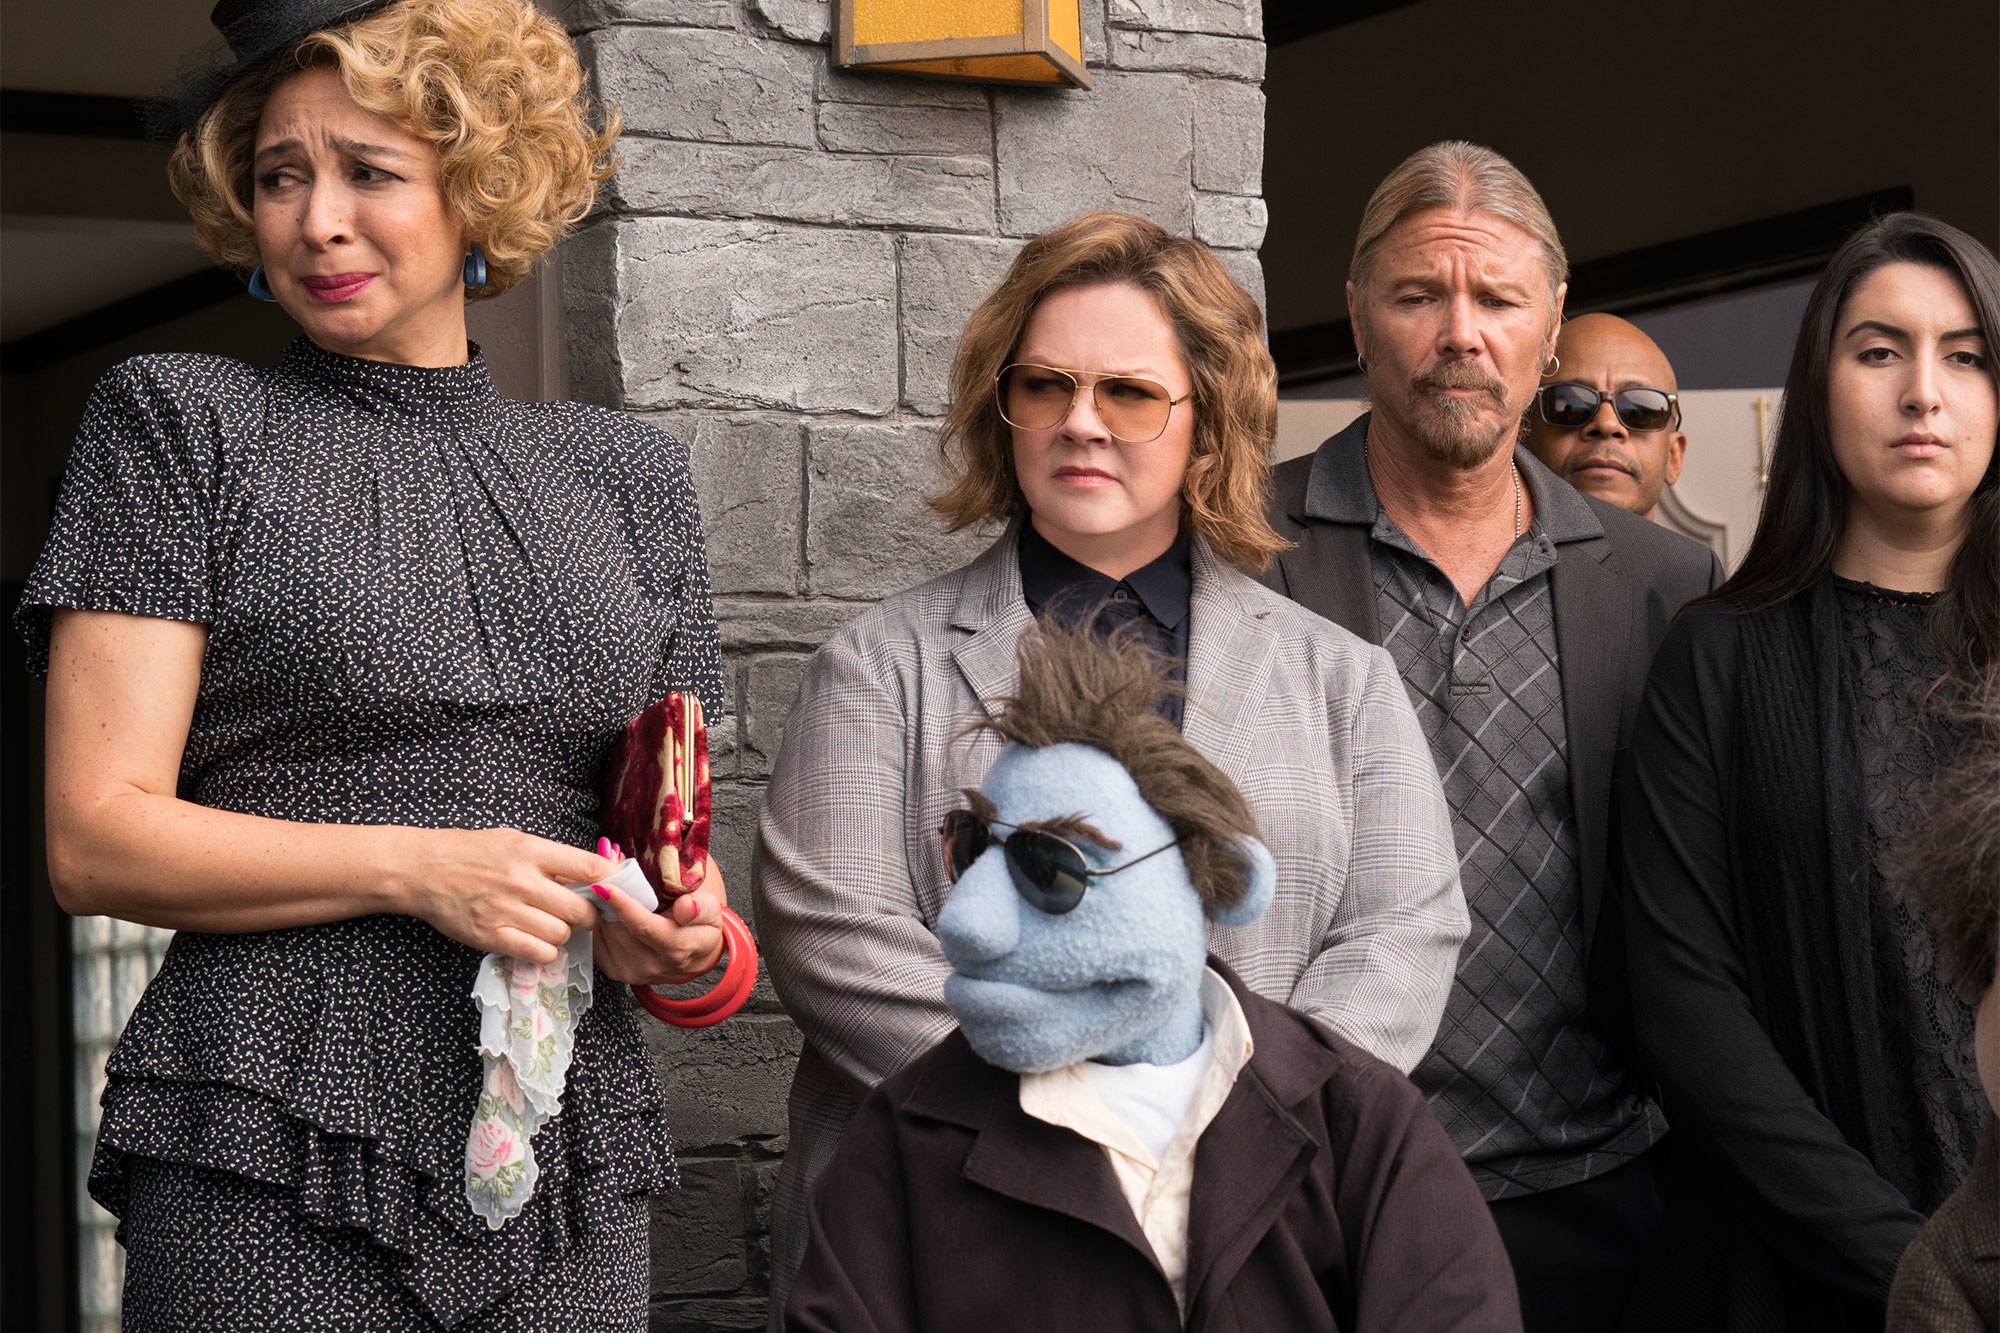 The happytime murders, movie review